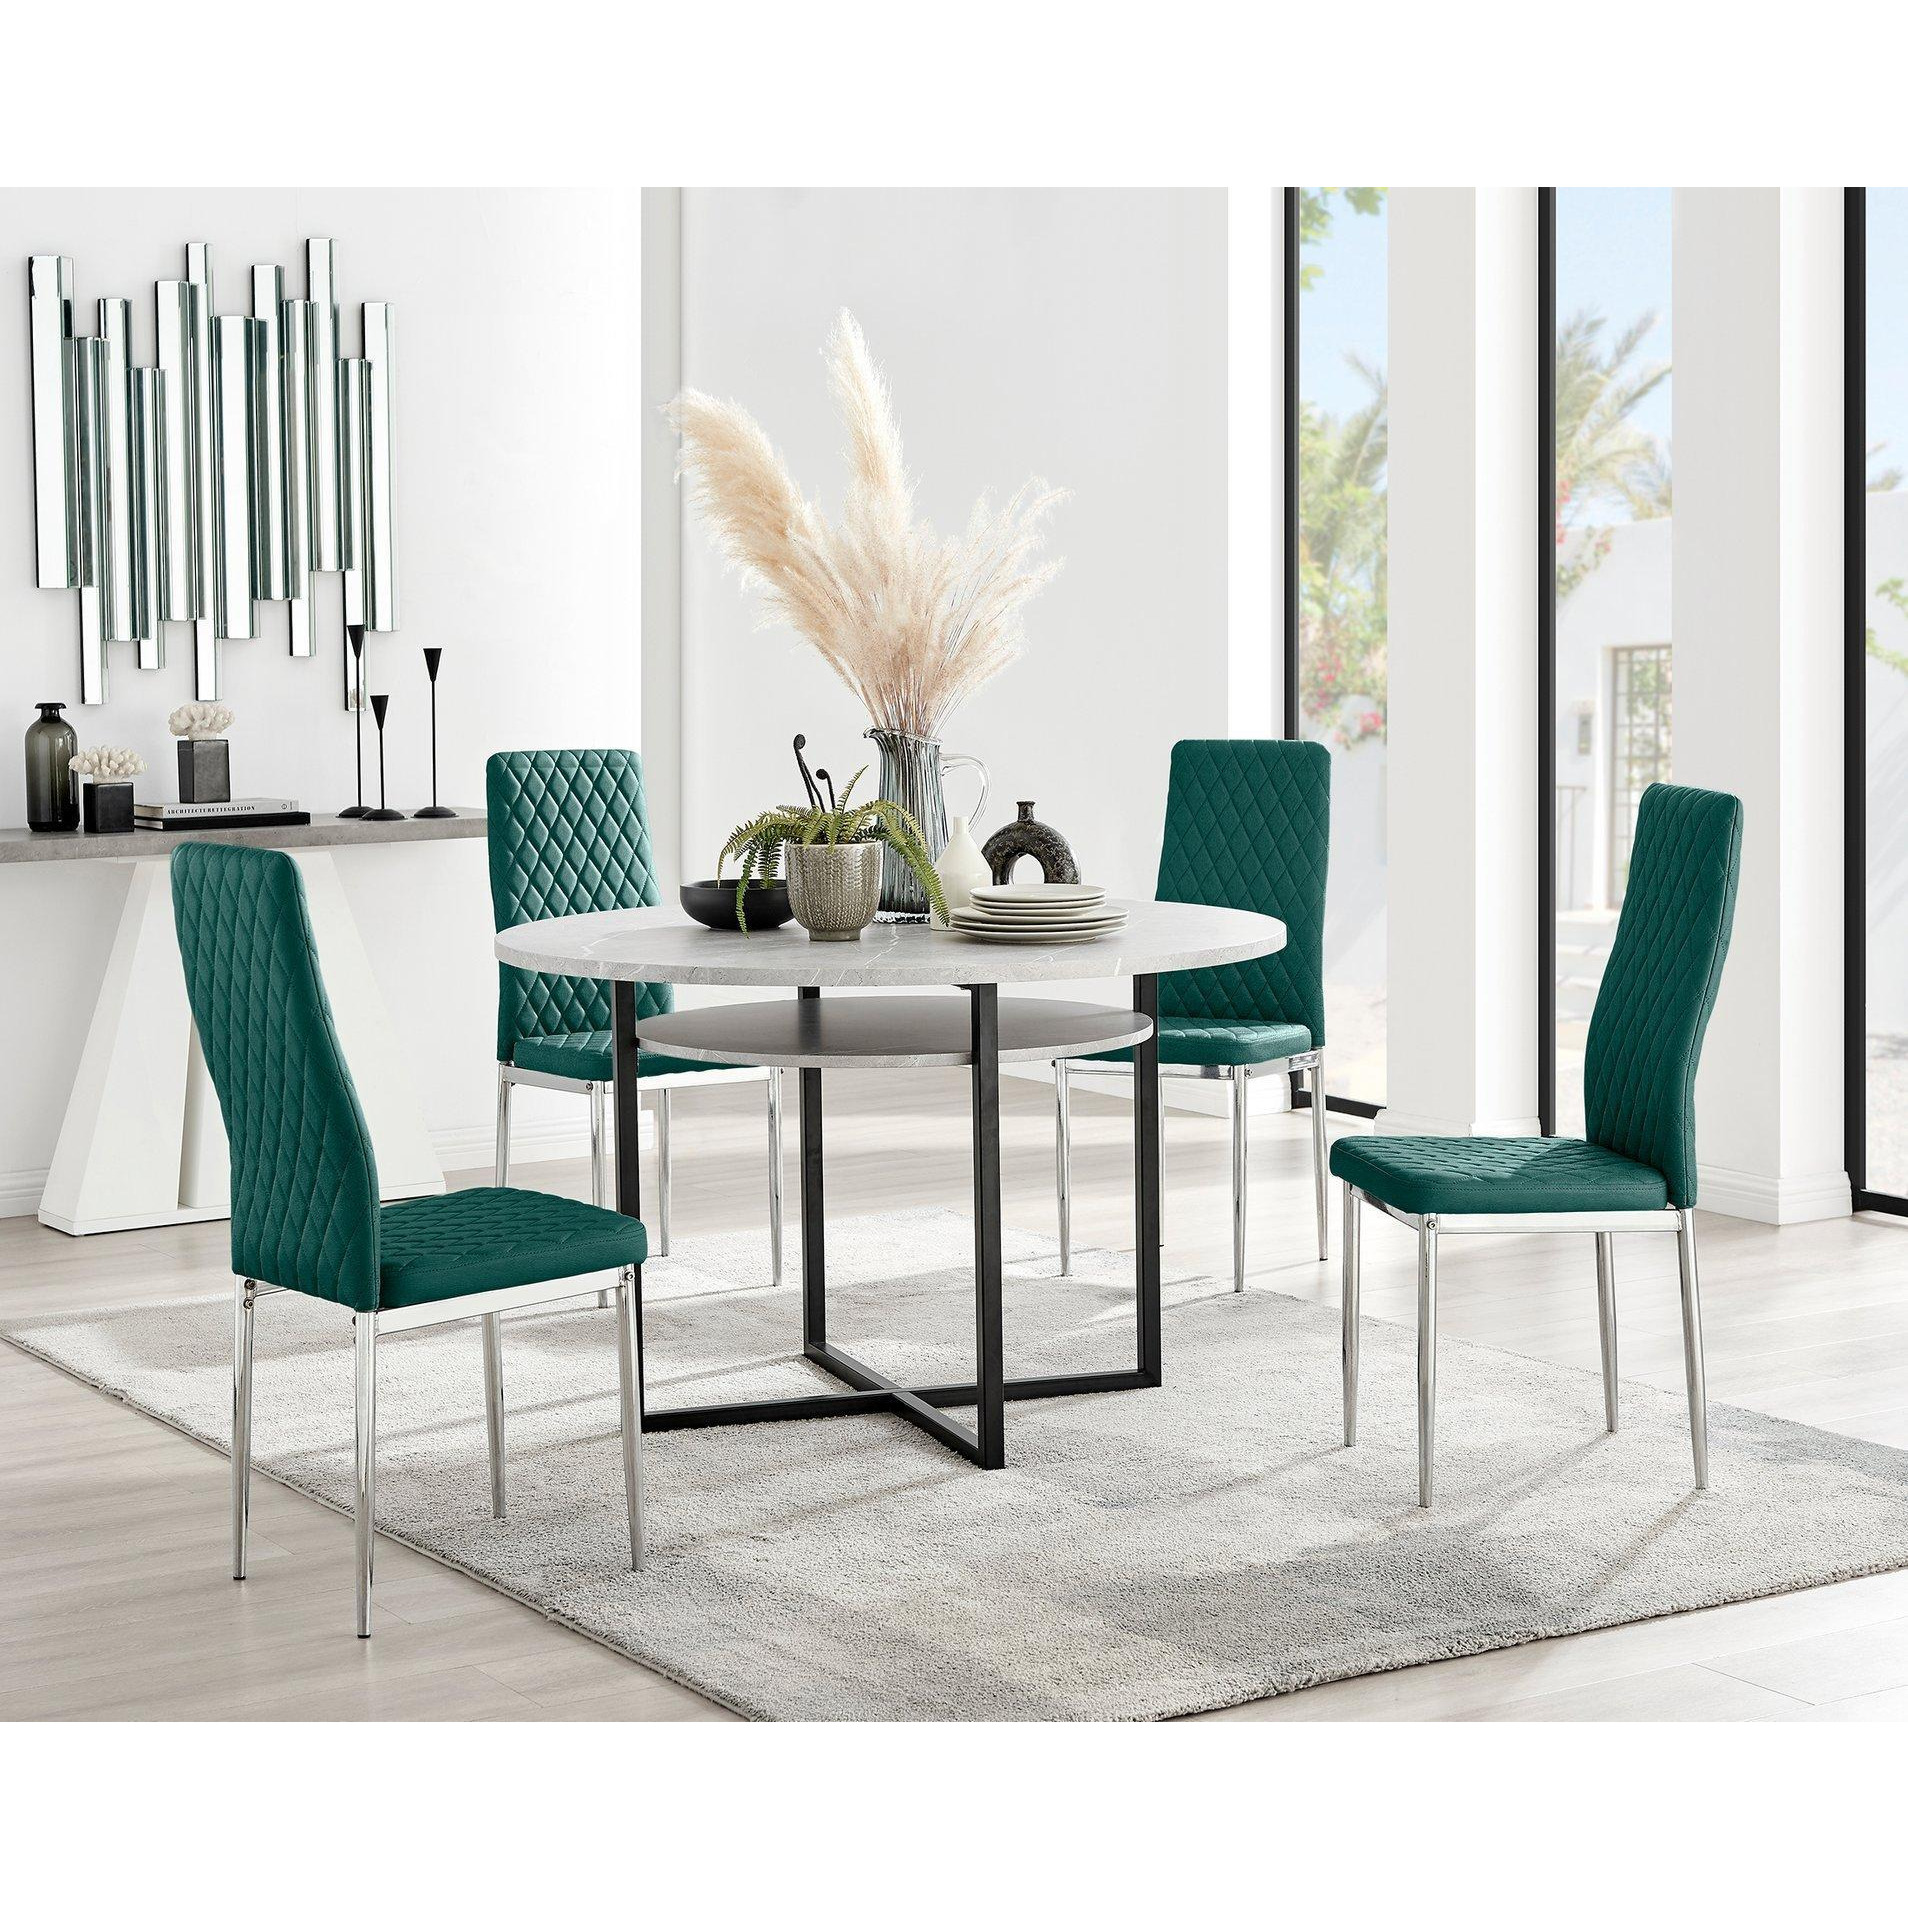 Adley Grey Concrete Effect Round Dining Table & 4 Velvet Milan Chairs - image 1